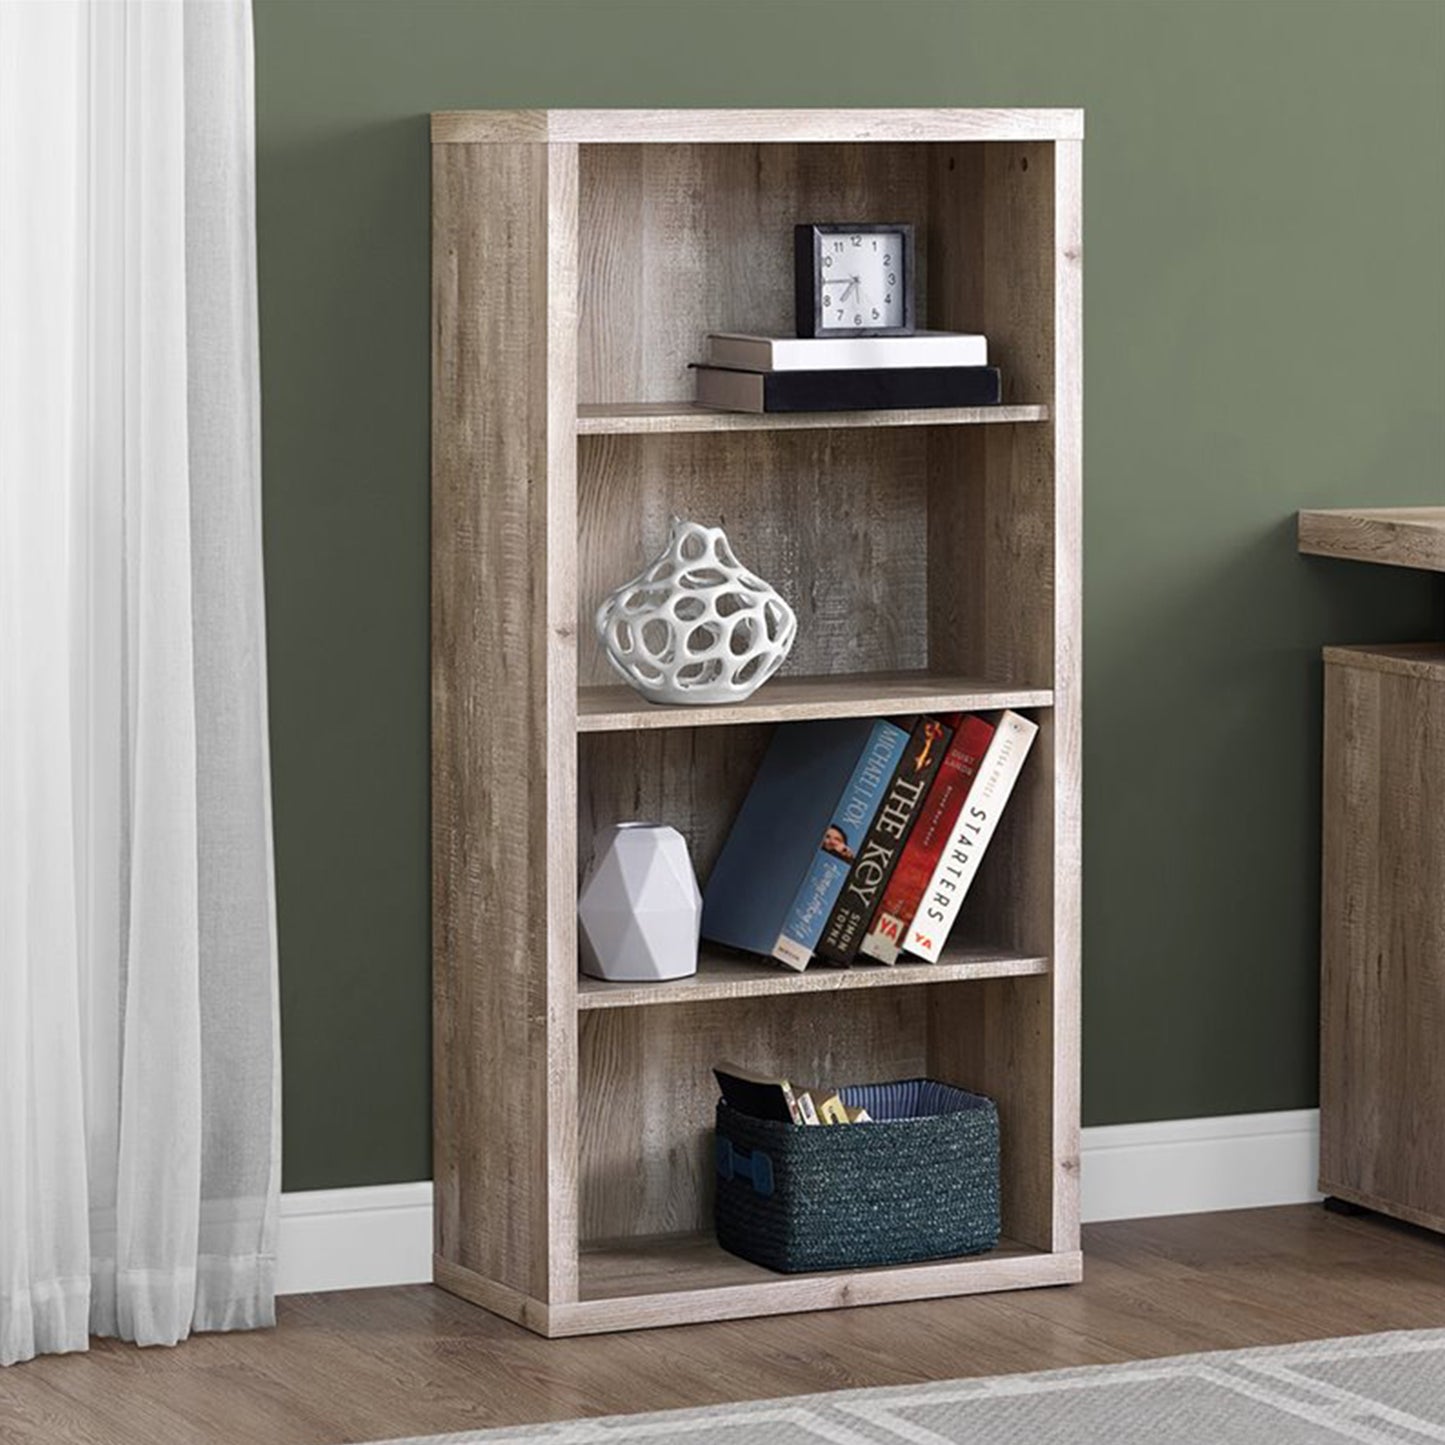 48" Taupe Four Tier Standard Bookcase